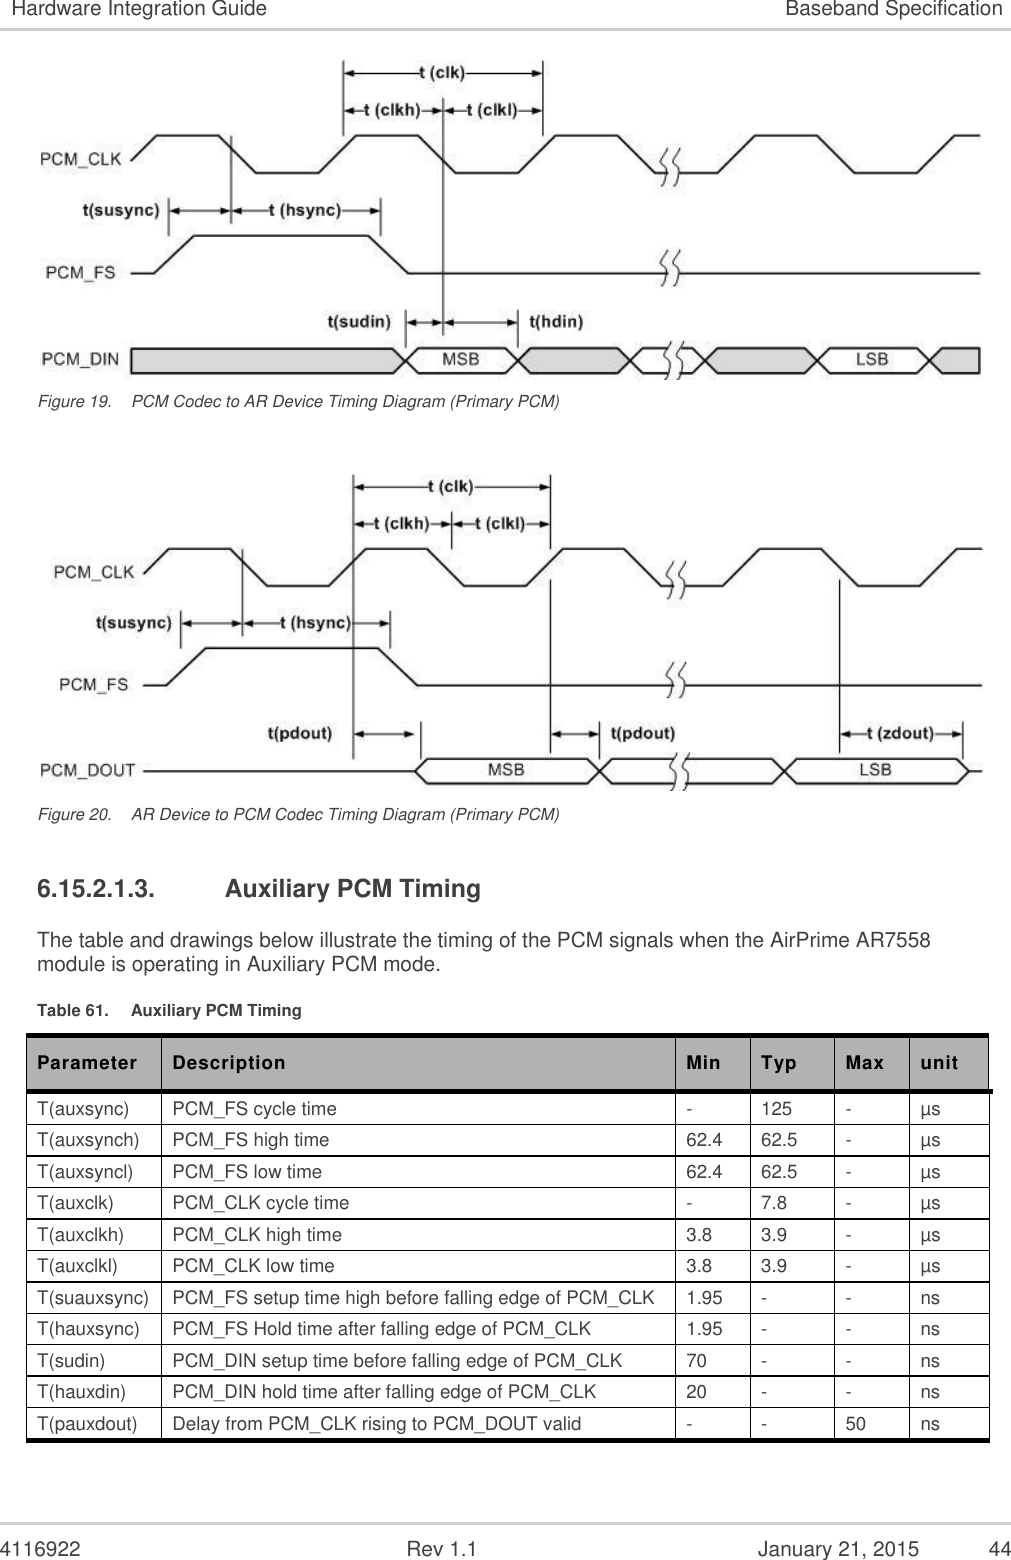   4116922              Rev 1.1          January 21, 2015  44 Hardware Integration Guide Baseband Specification  Figure 19.  PCM Codec to AR Device Timing Diagram (Primary PCM)   Figure 20.  AR Device to PCM Codec Timing Diagram (Primary PCM) 6.15.2.1.3.  Auxiliary PCM Timing The table and drawings below illustrate the timing of the PCM signals when the AirPrime AR7558 module is operating in Auxiliary PCM mode. Table 61.  Auxiliary PCM Timing Parameter Description Min Typ Max unit T(auxsync) PCM_FS cycle time  - 125 - µs  T(auxsynch) PCM_FS high time 62.4 62.5 - µs  T(auxsyncl) PCM_FS low time 62.4 62.5 - µs  T(auxclk) PCM_CLK cycle time - 7.8 - µs  T(auxclkh) PCM_CLK high time 3.8 3.9 - µs  T(auxclkl) PCM_CLK low time 3.8 3.9 - µs  T(suauxsync)  PCM_FS setup time high before falling edge of PCM_CLK 1.95 - - ns T(hauxsync) PCM_FS Hold time after falling edge of PCM_CLK 1.95 - - ns T(sudin) PCM_DIN setup time before falling edge of PCM_CLK 70 - - ns T(hauxdin) PCM_DIN hold time after falling edge of PCM_CLK 20 - - ns T(pauxdout) Delay from PCM_CLK rising to PCM_DOUT valid - - 50 ns 